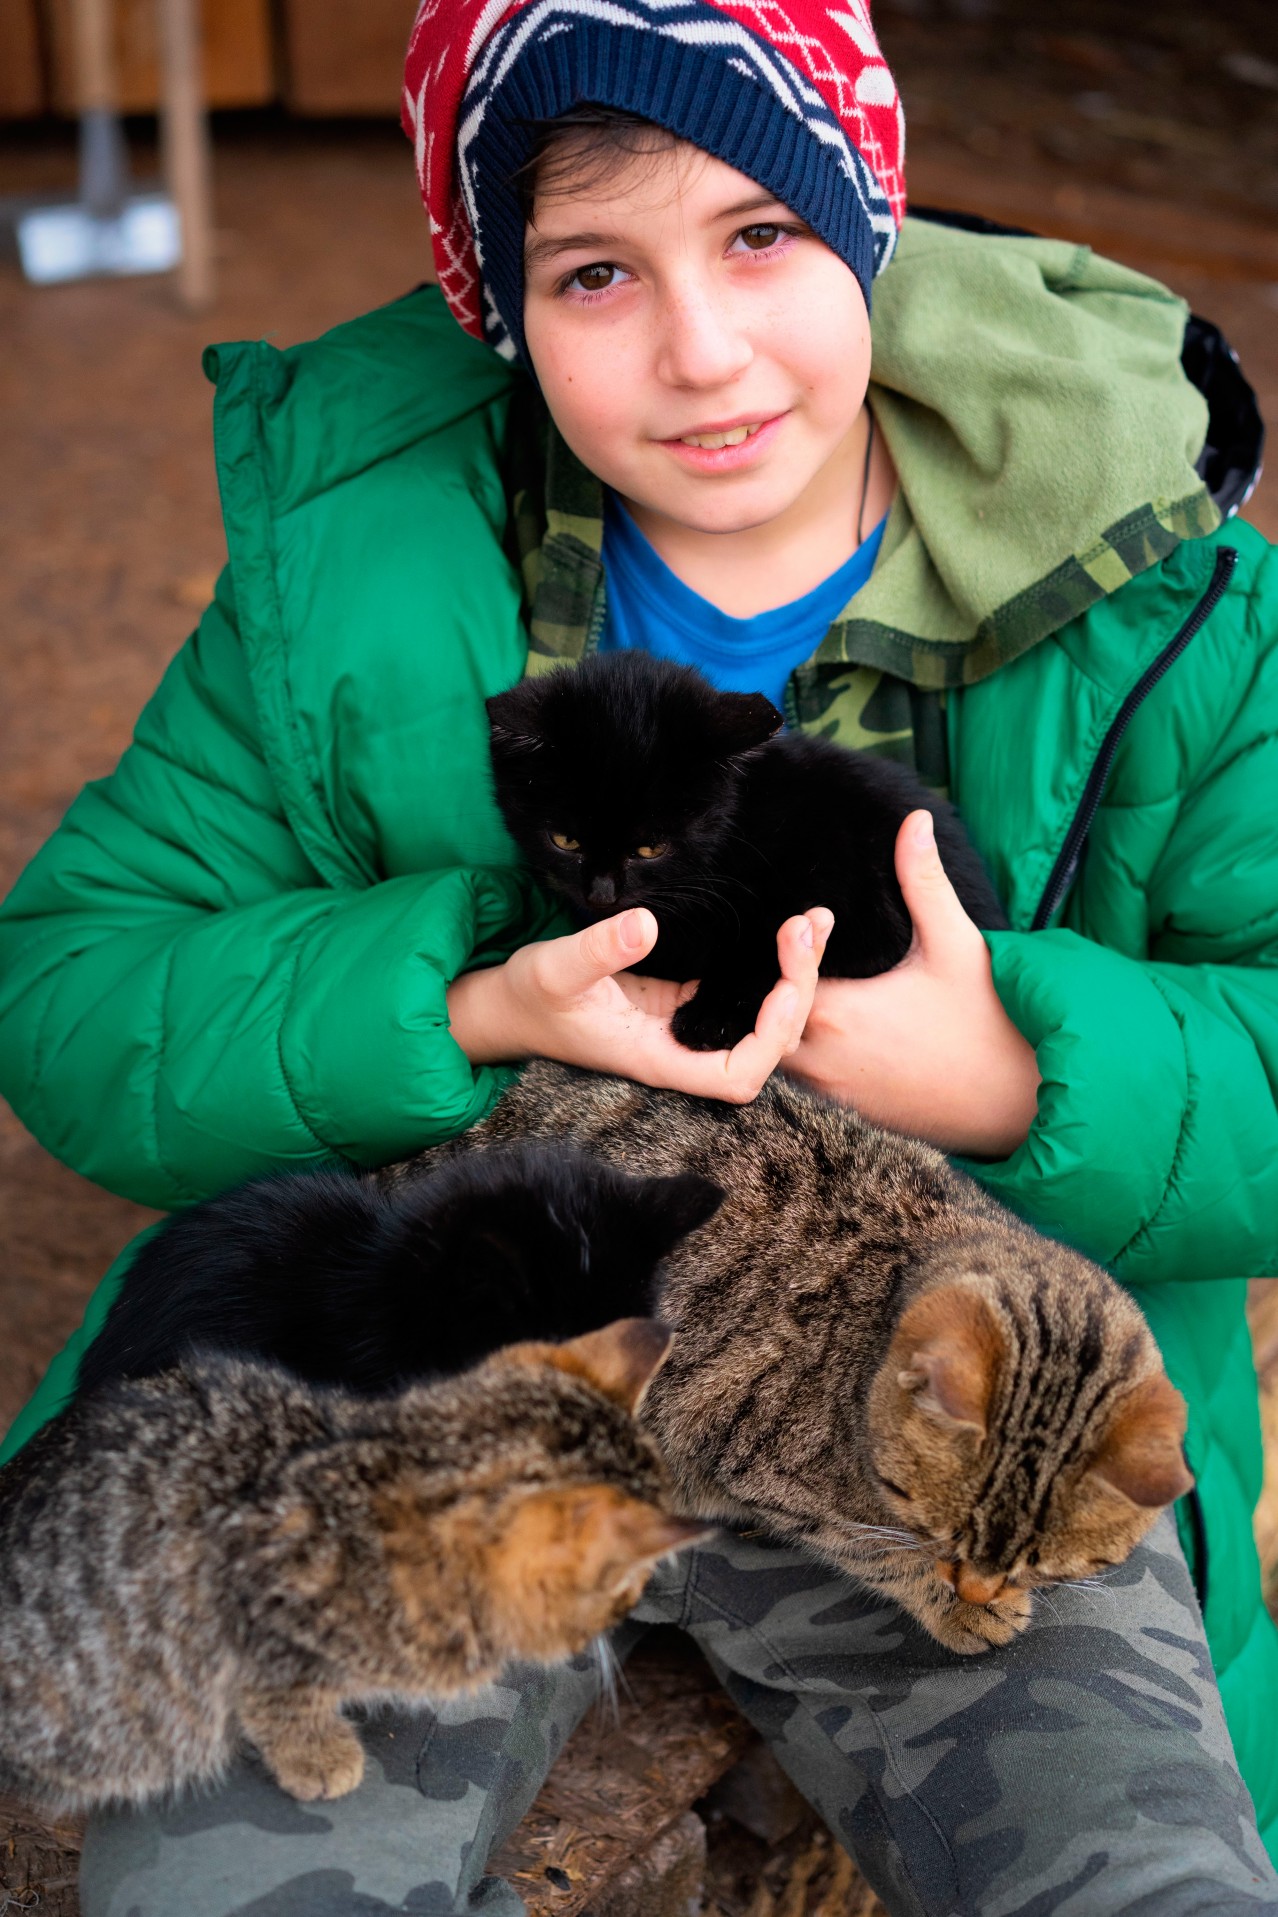 Smiling boy with cats and kittens